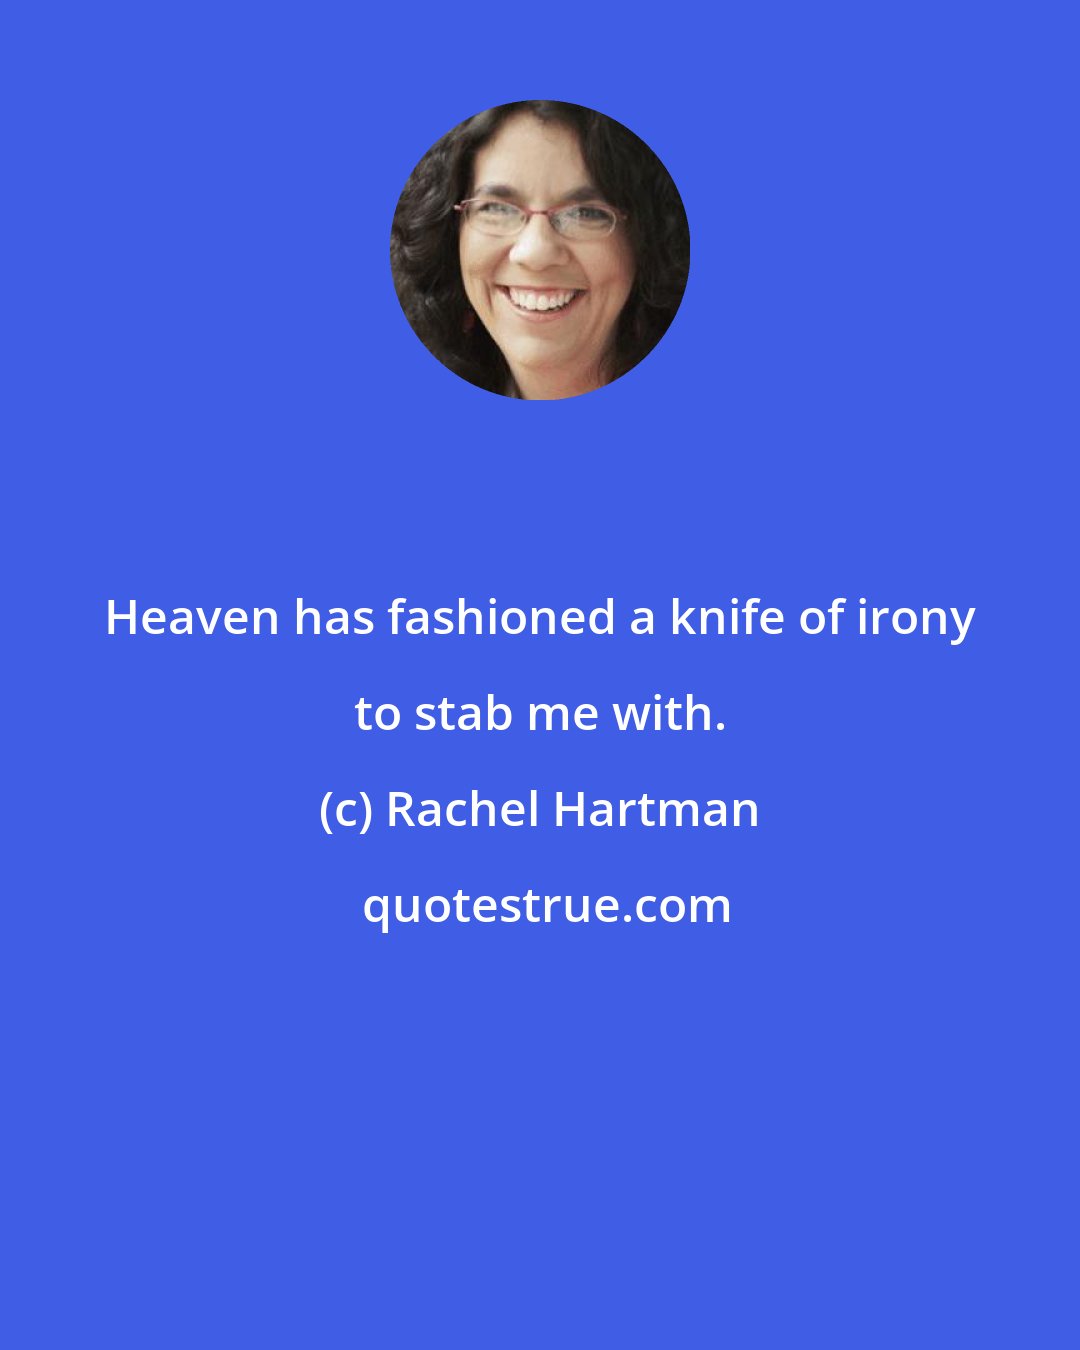 Rachel Hartman: Heaven has fashioned a knife of irony to stab me with.